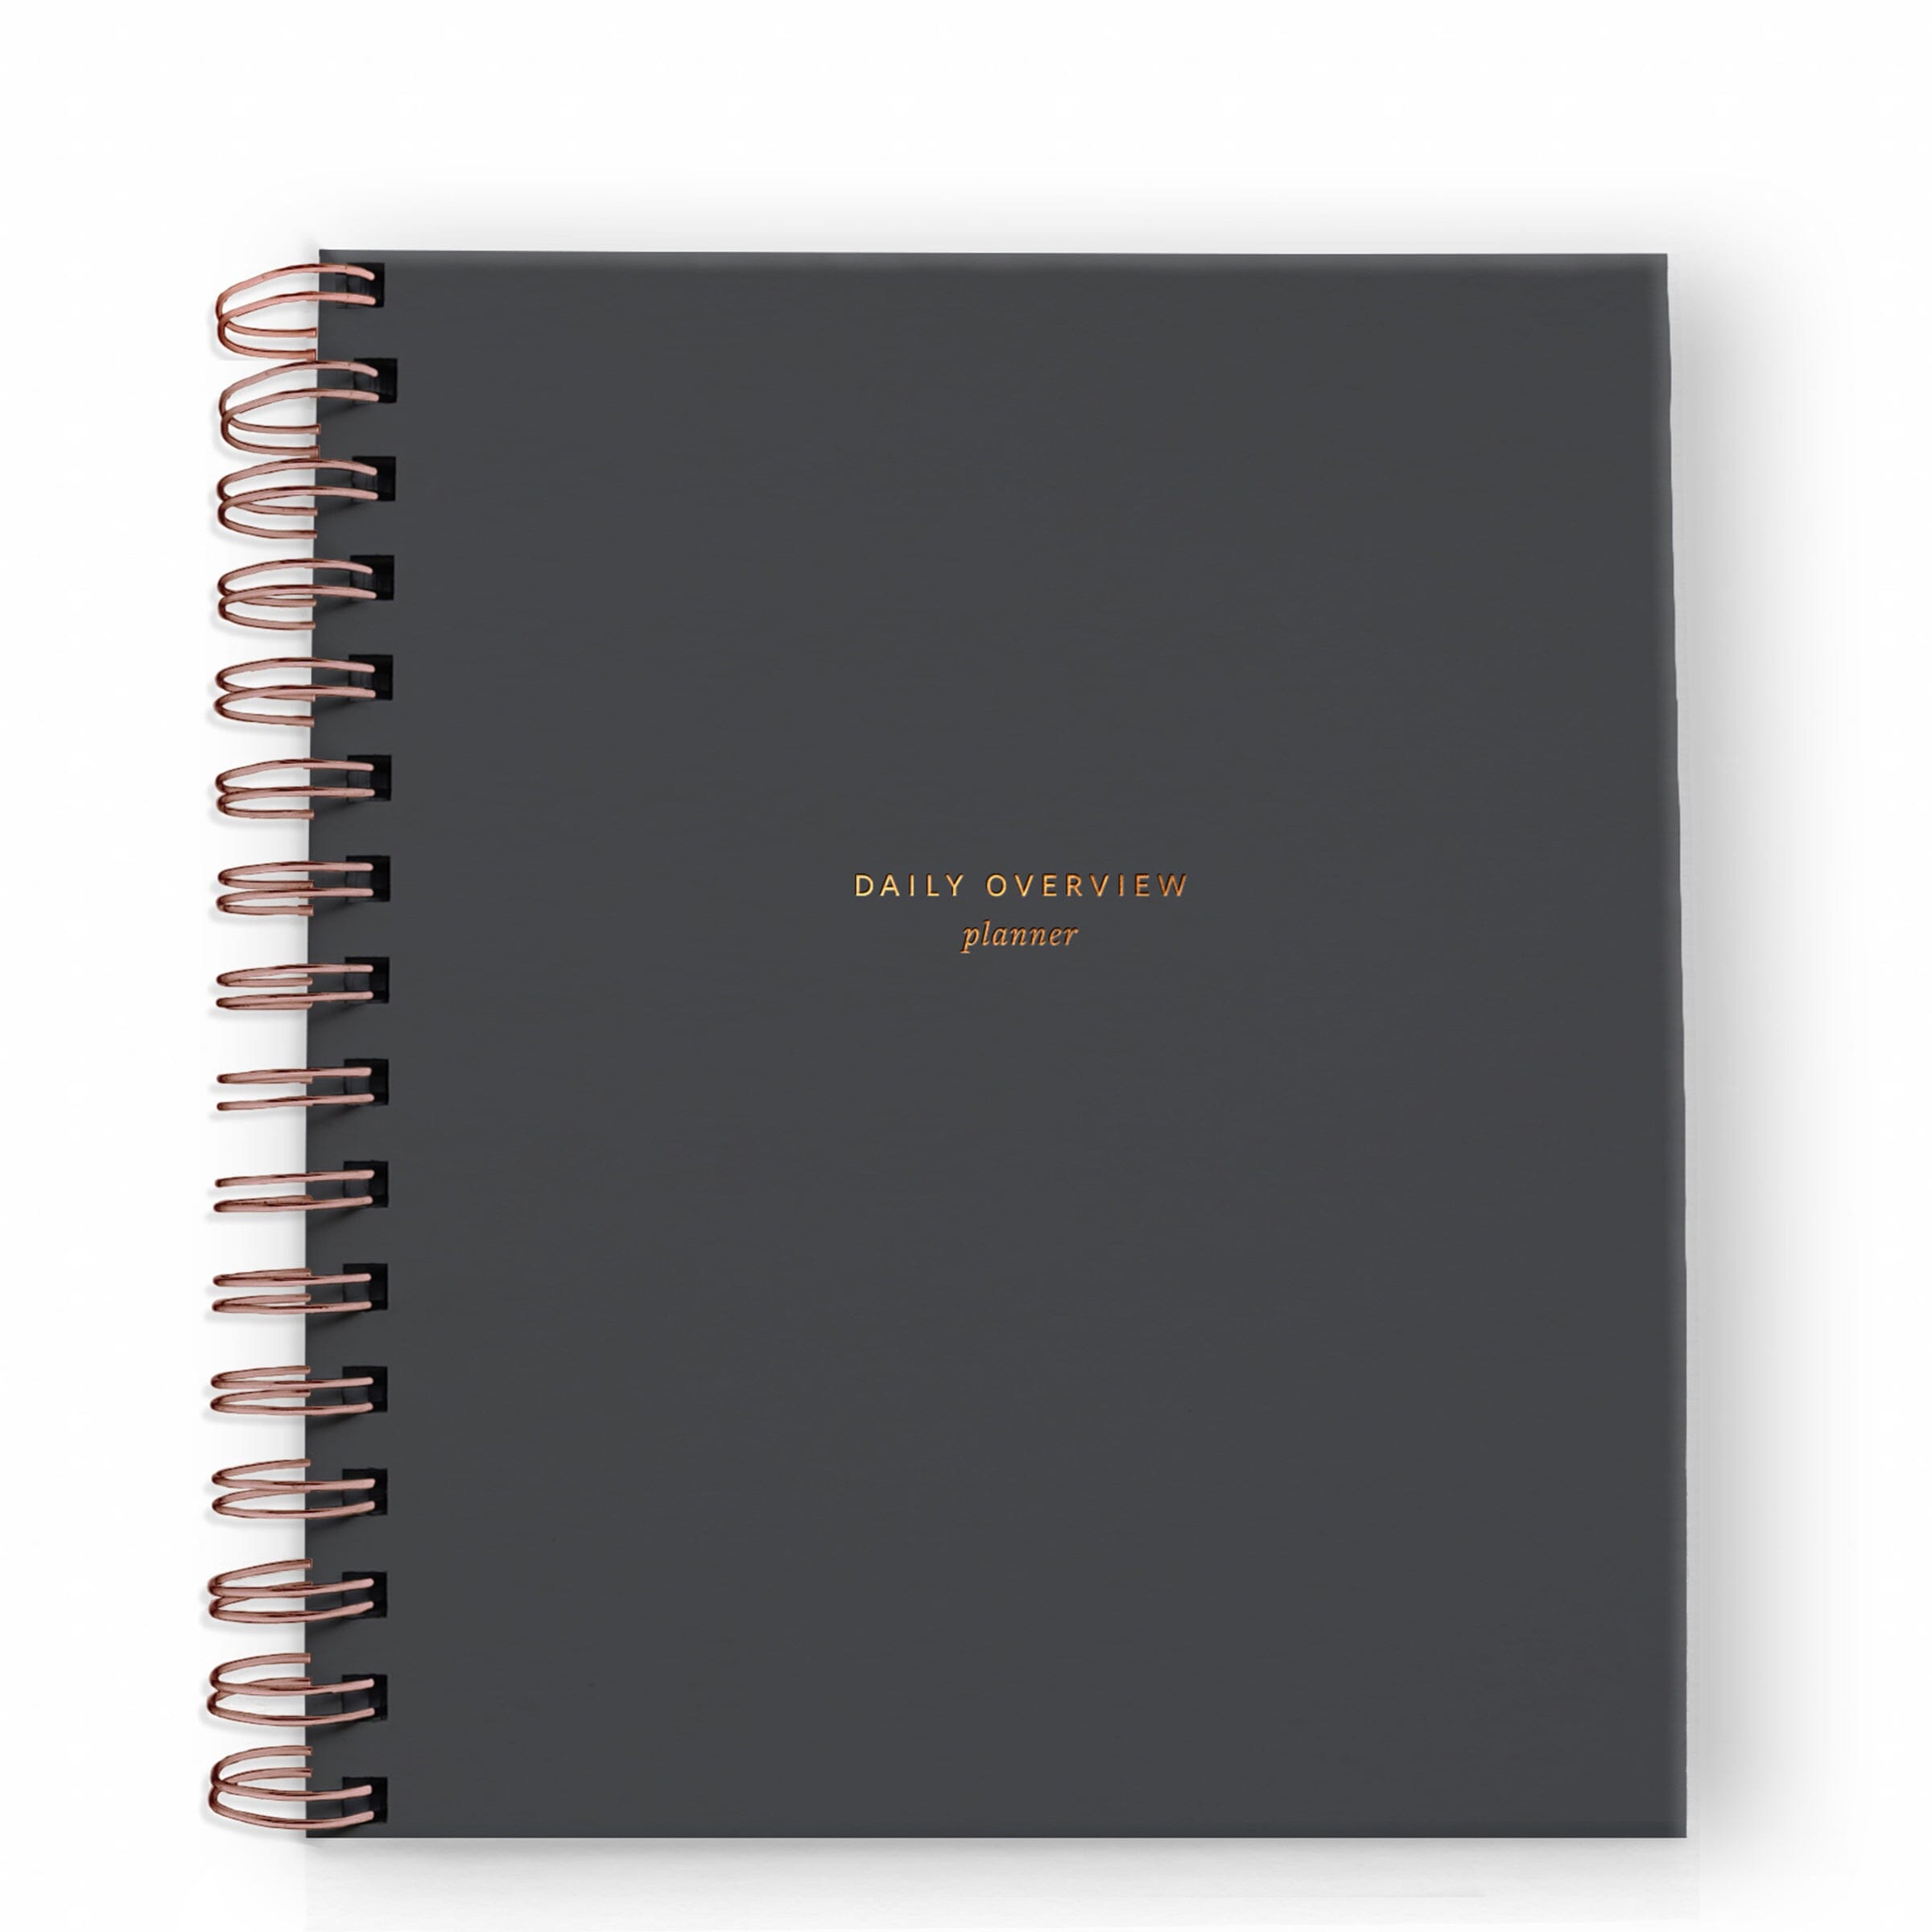 Daily Overview Planner - 5 Colors - Ramona & Ruth Charcoal 